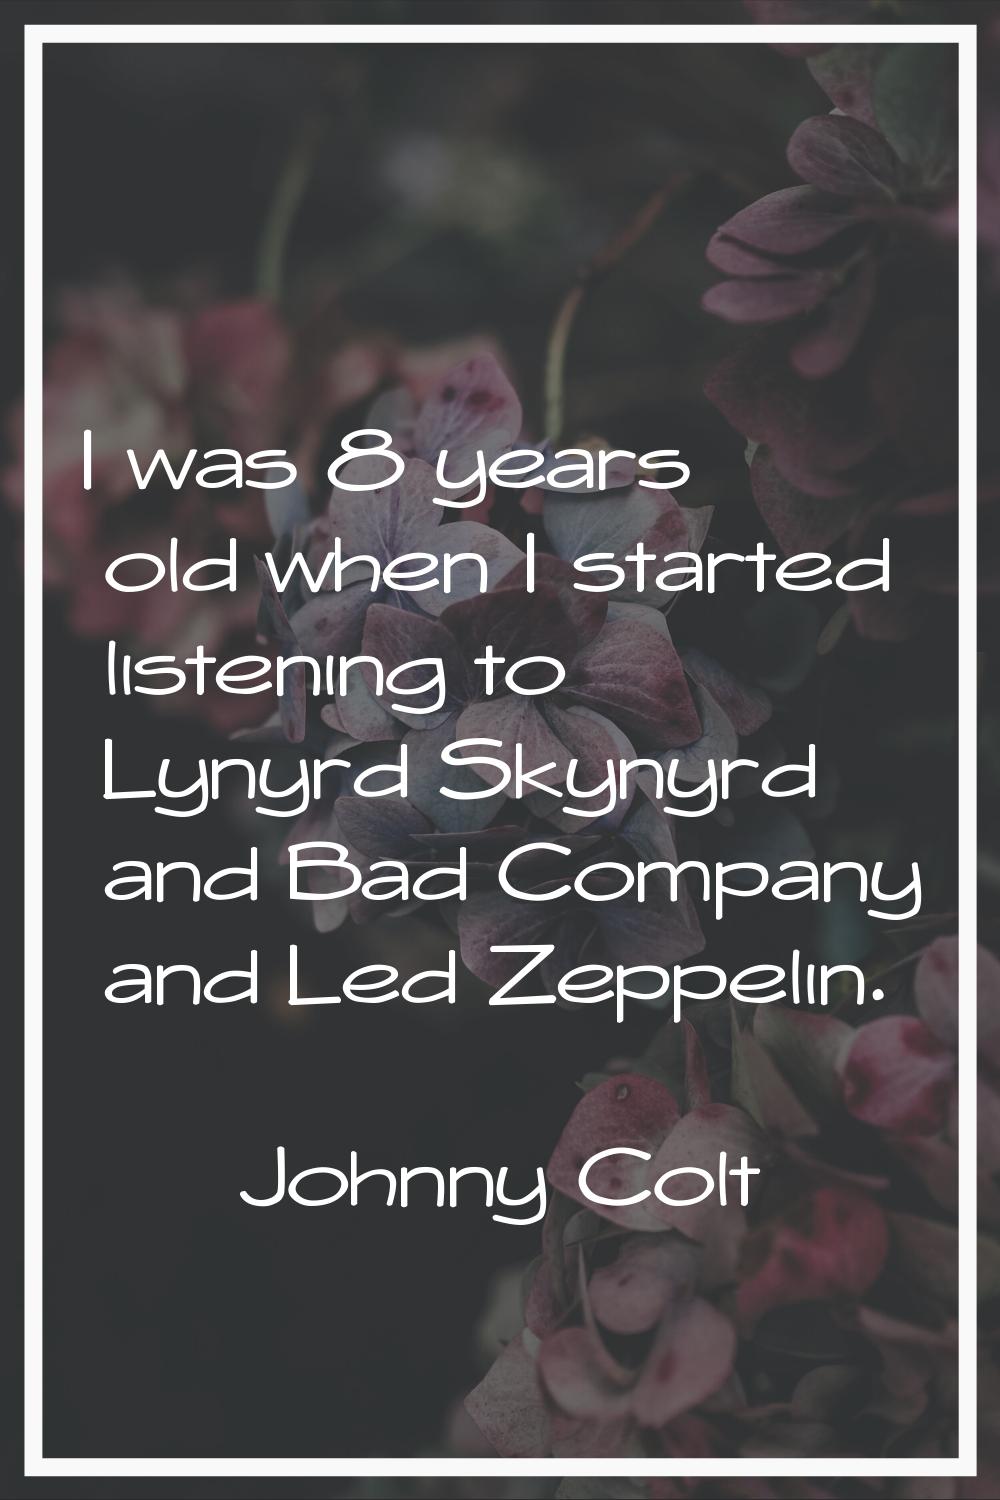 I was 8 years old when I started listening to Lynyrd Skynyrd and Bad Company and Led Zeppelin.